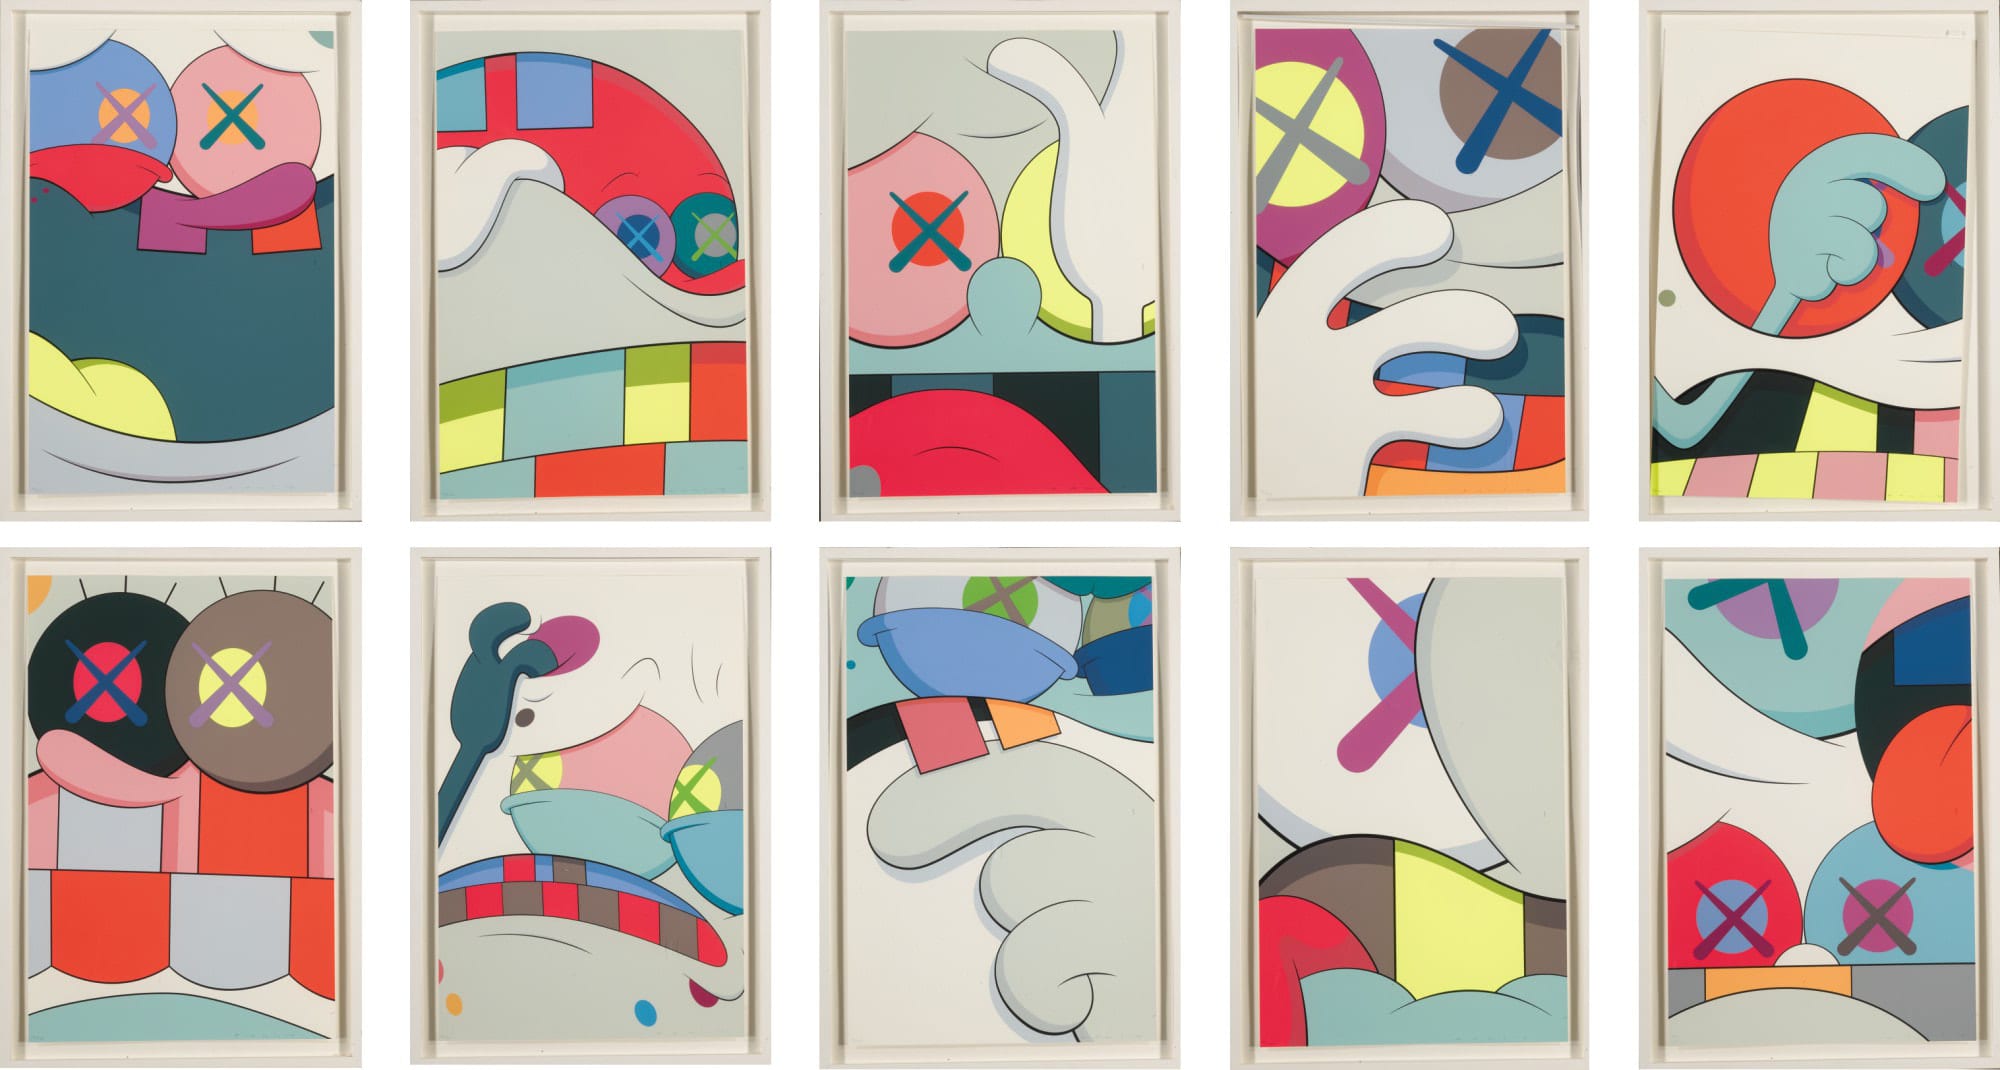 The graffiti artist from Jersey who disrupted the Art World, Reasons To Invest In KAWS